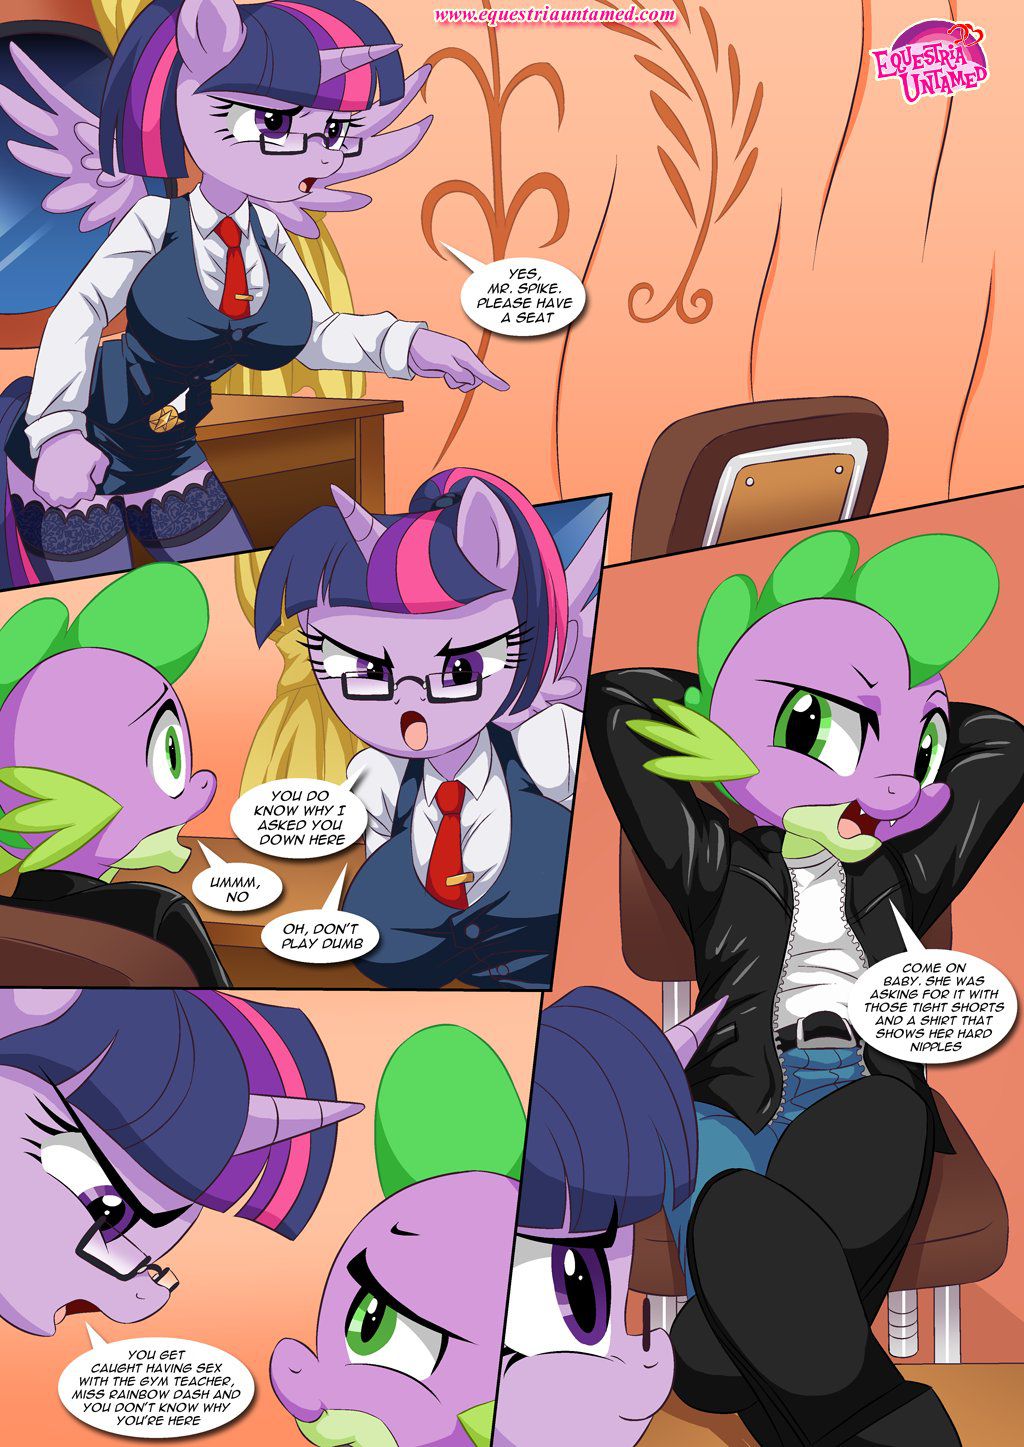 [Palcomix] Sex Ed with Miss Twilight Sparkle (My Little Pony Friendship Is Magic) [Ongoing] 17